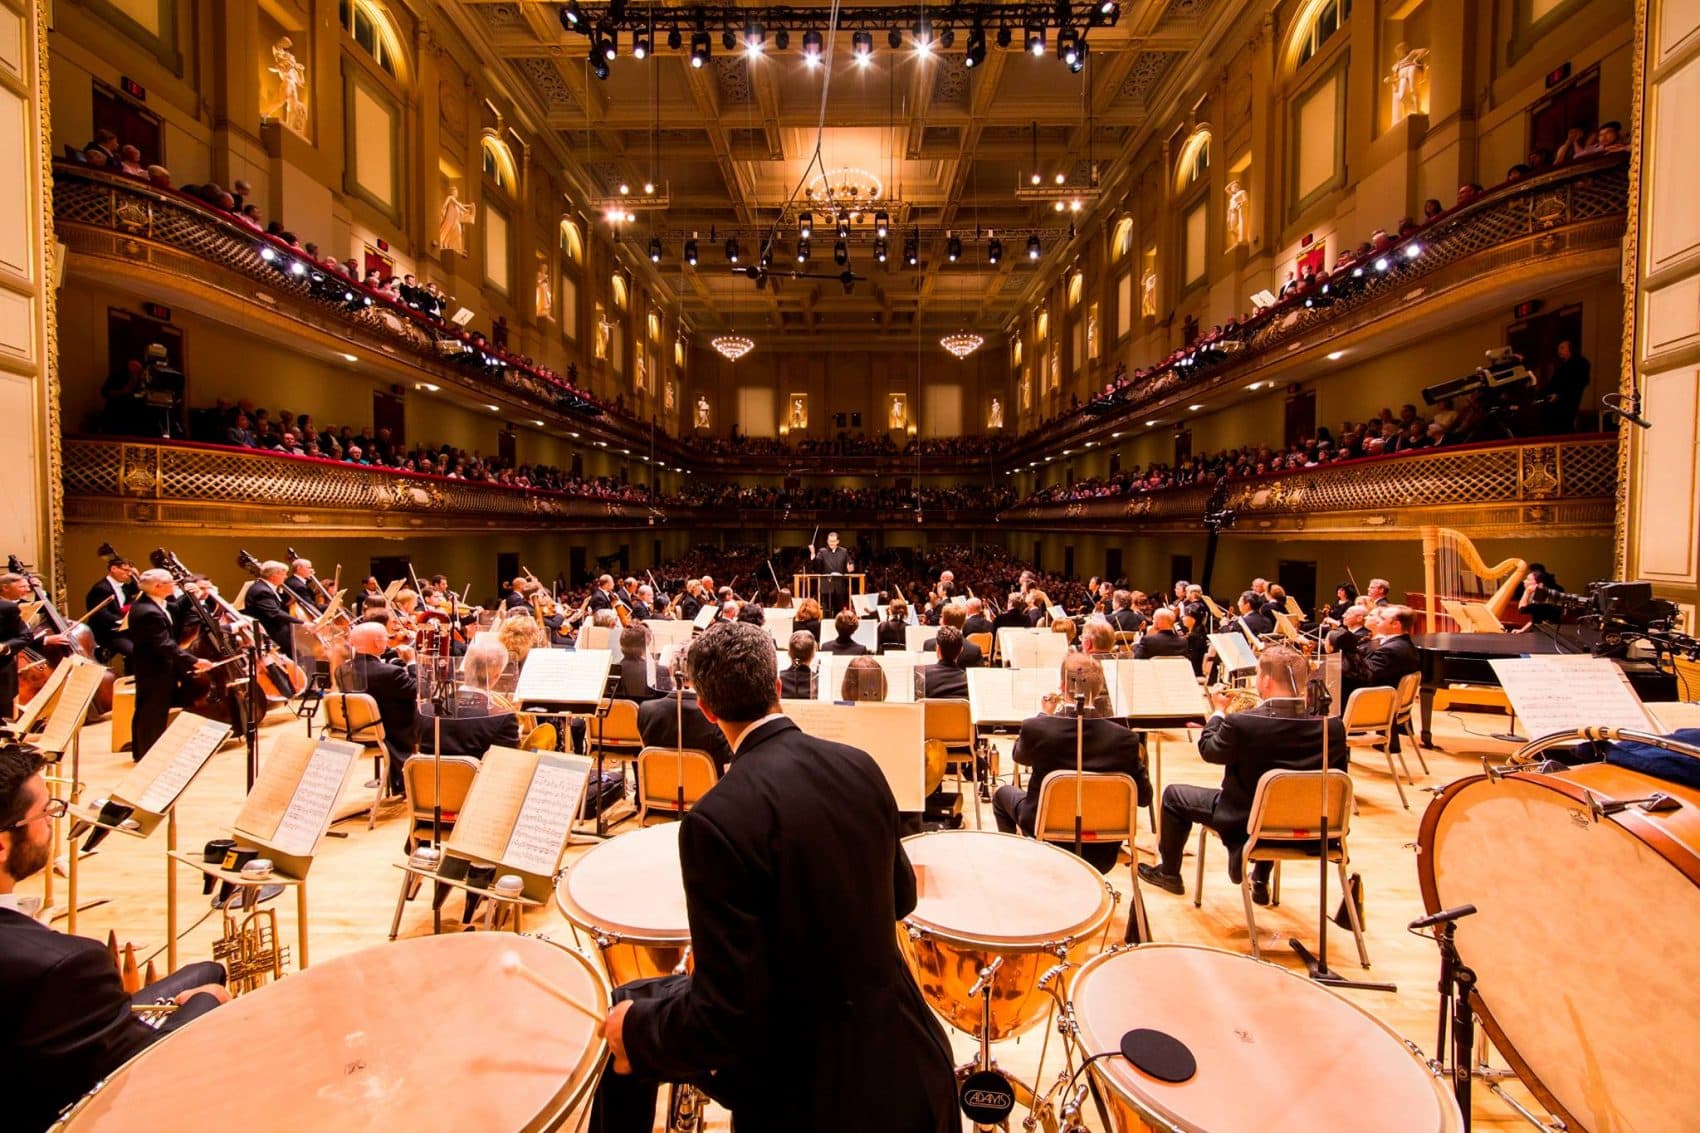 Andris Nelsons and the Boston Symphony Orchestra on stage at Symphony Hall. (Courtesy Boston Symphony Orchestra)